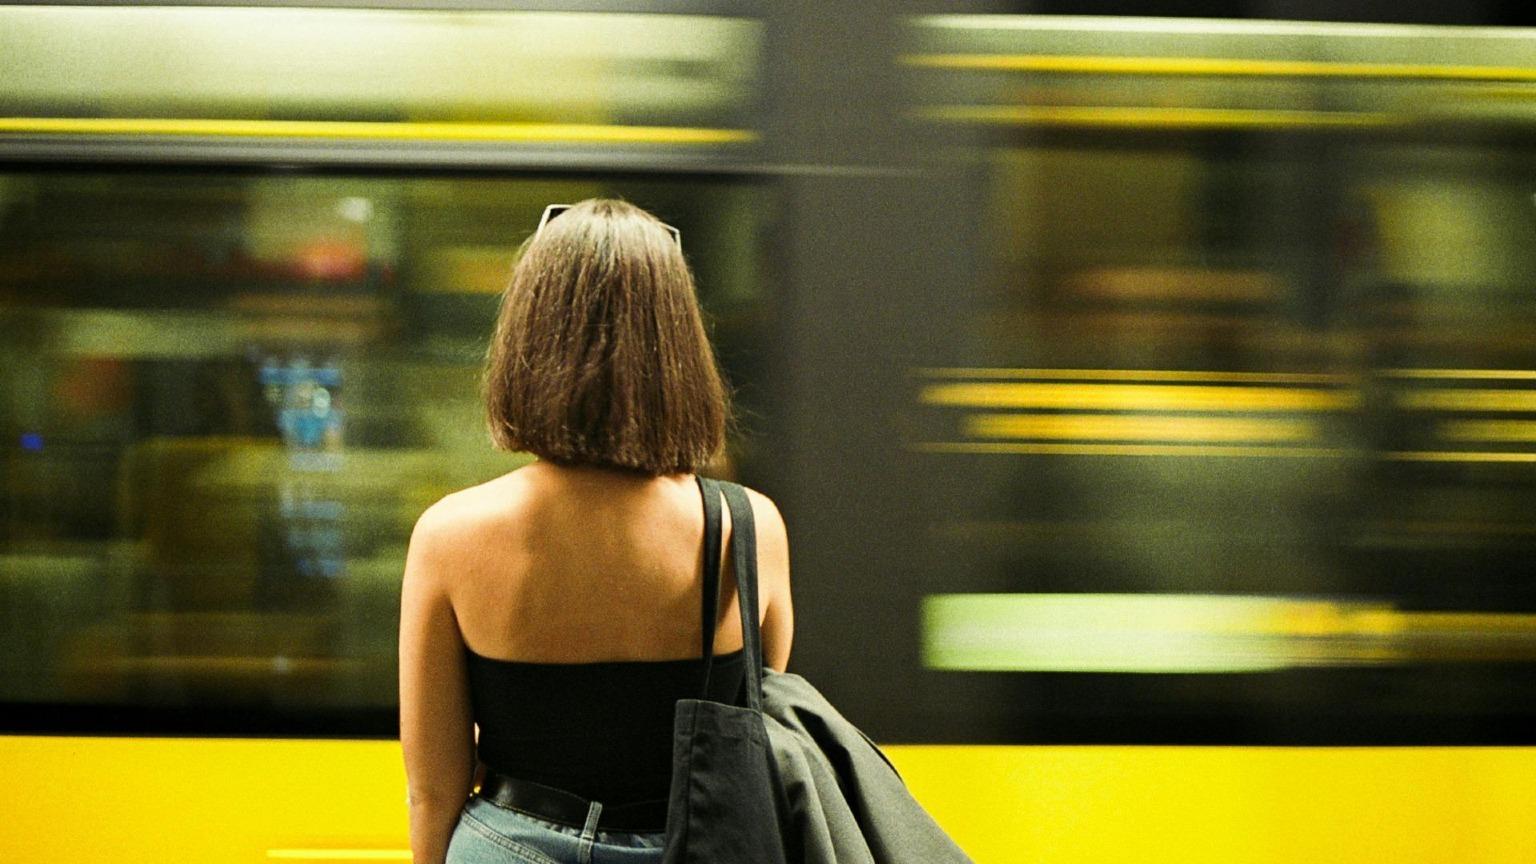 A woman standing on the platform gazes at a Metro train passing by in Porto, Portugal